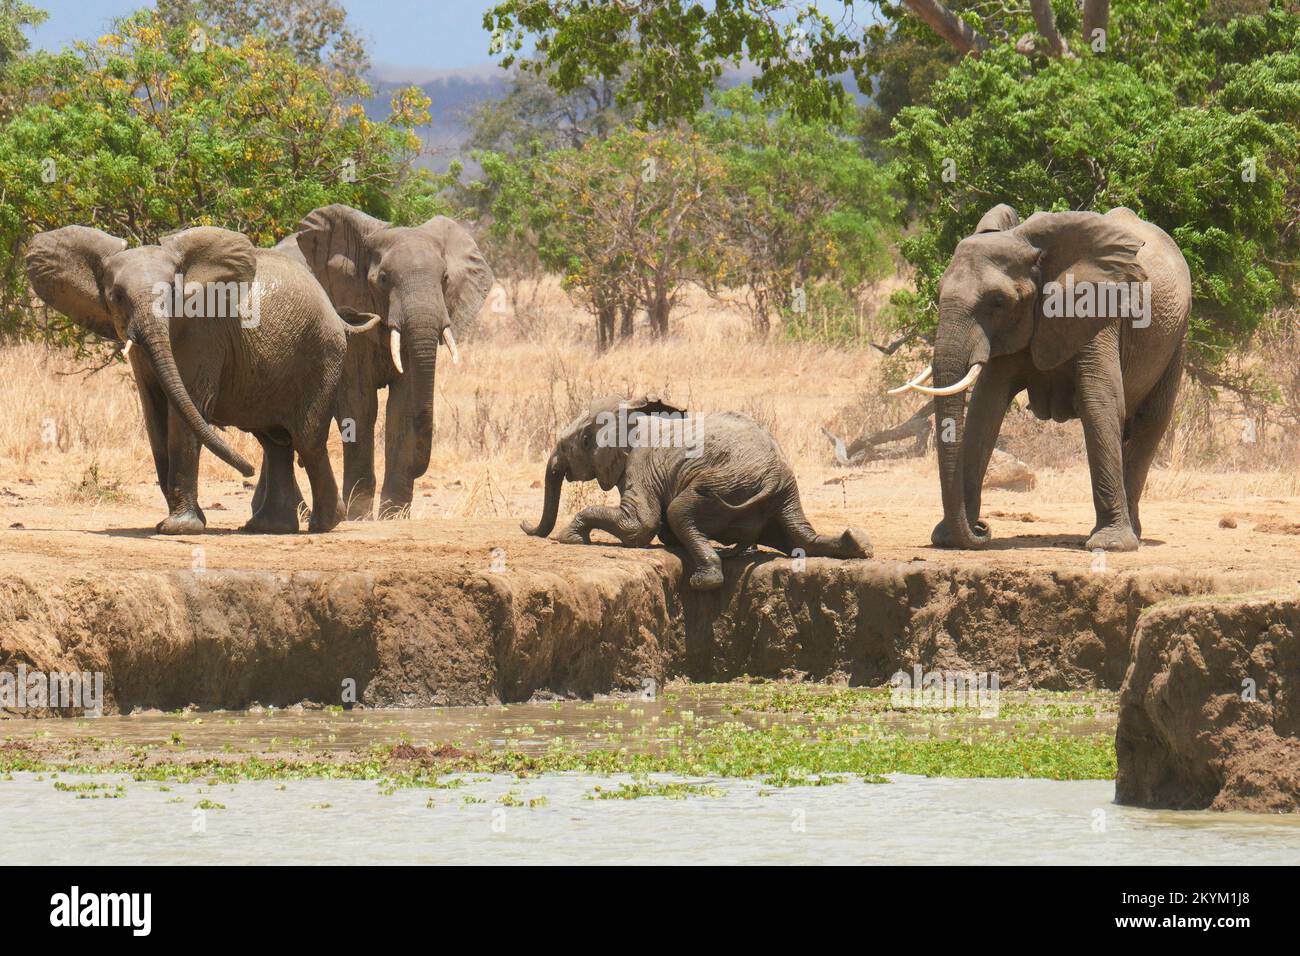 A young elephant struggles to climb up a watering hole bank as a  family of African Bush Elephants stop in a watering hole to drink in the midday heat Stock Photo